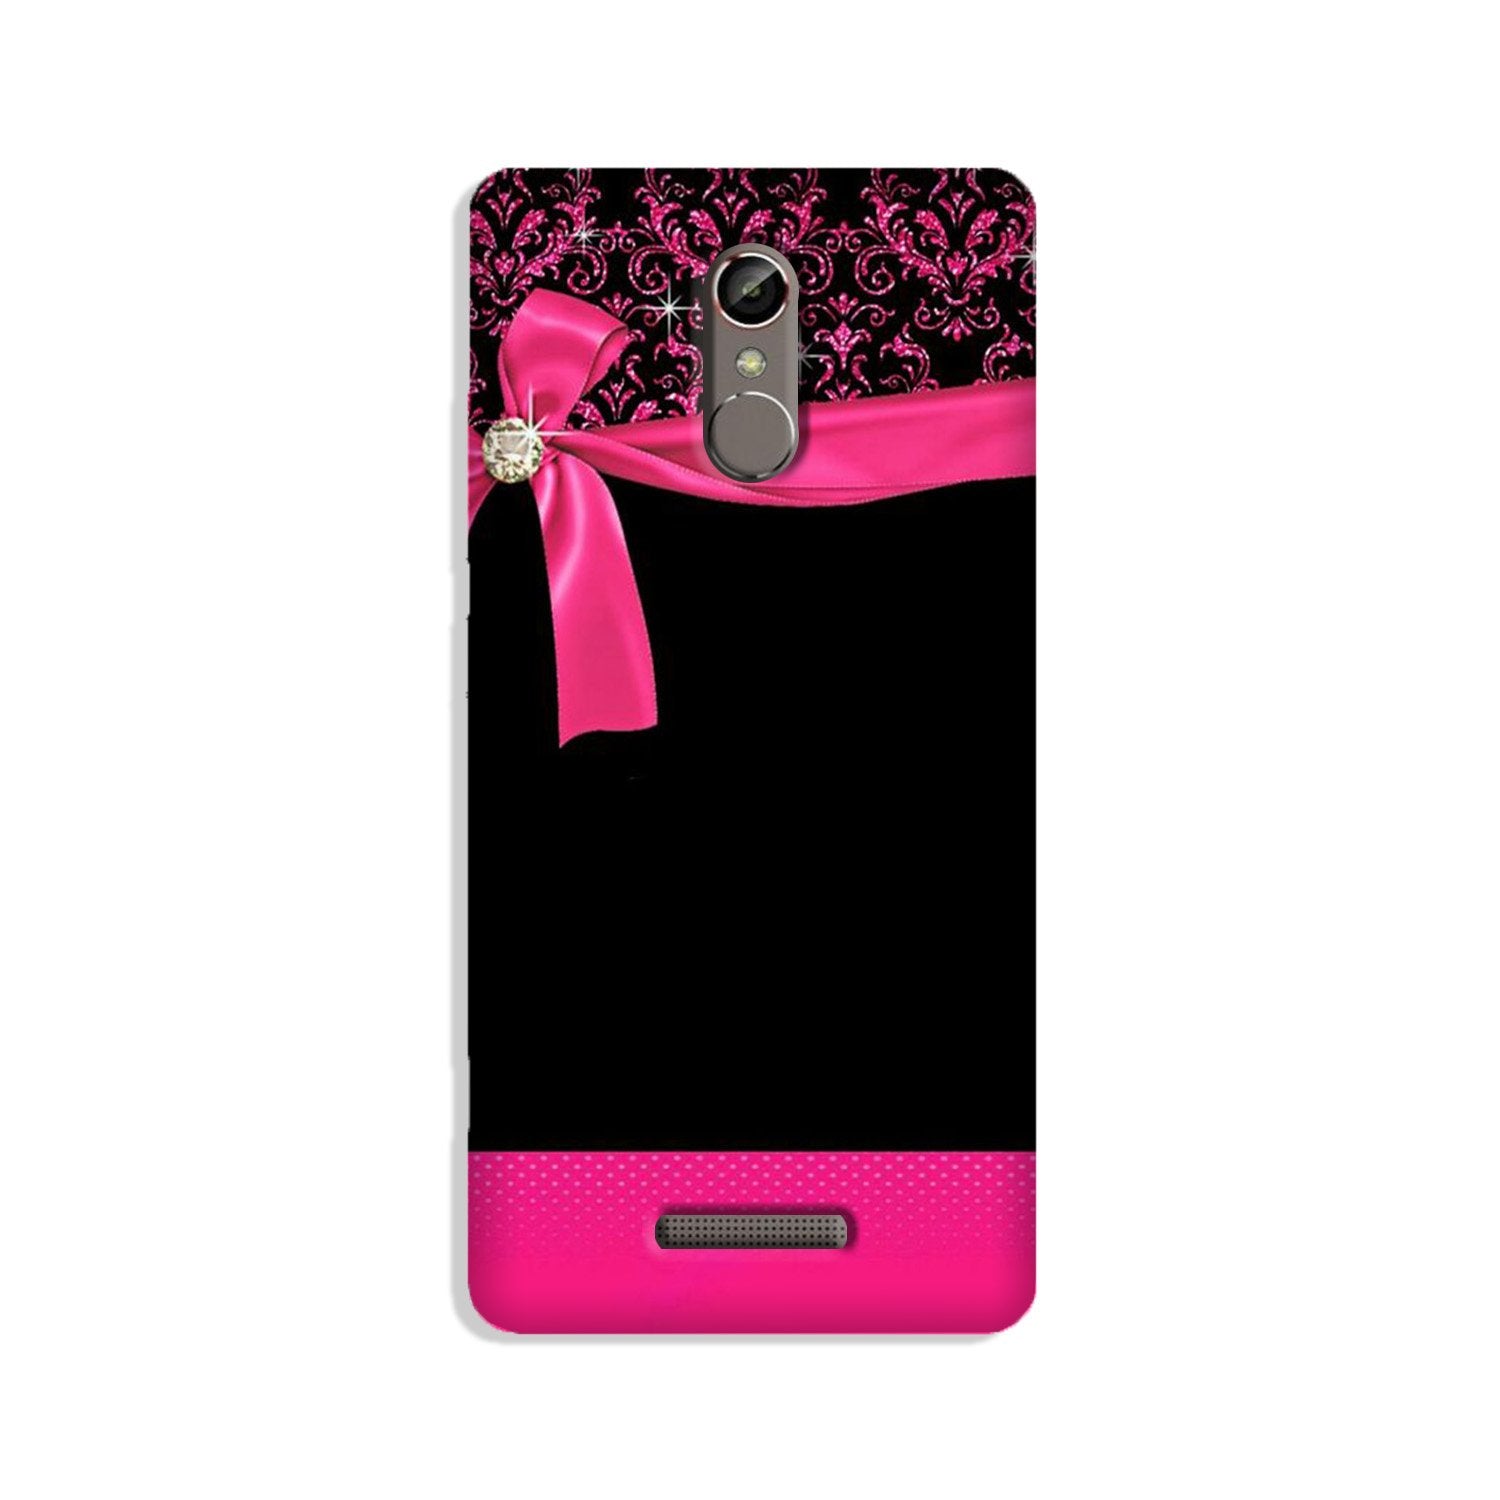 Gift Wrap4 Case for Gionee S6s